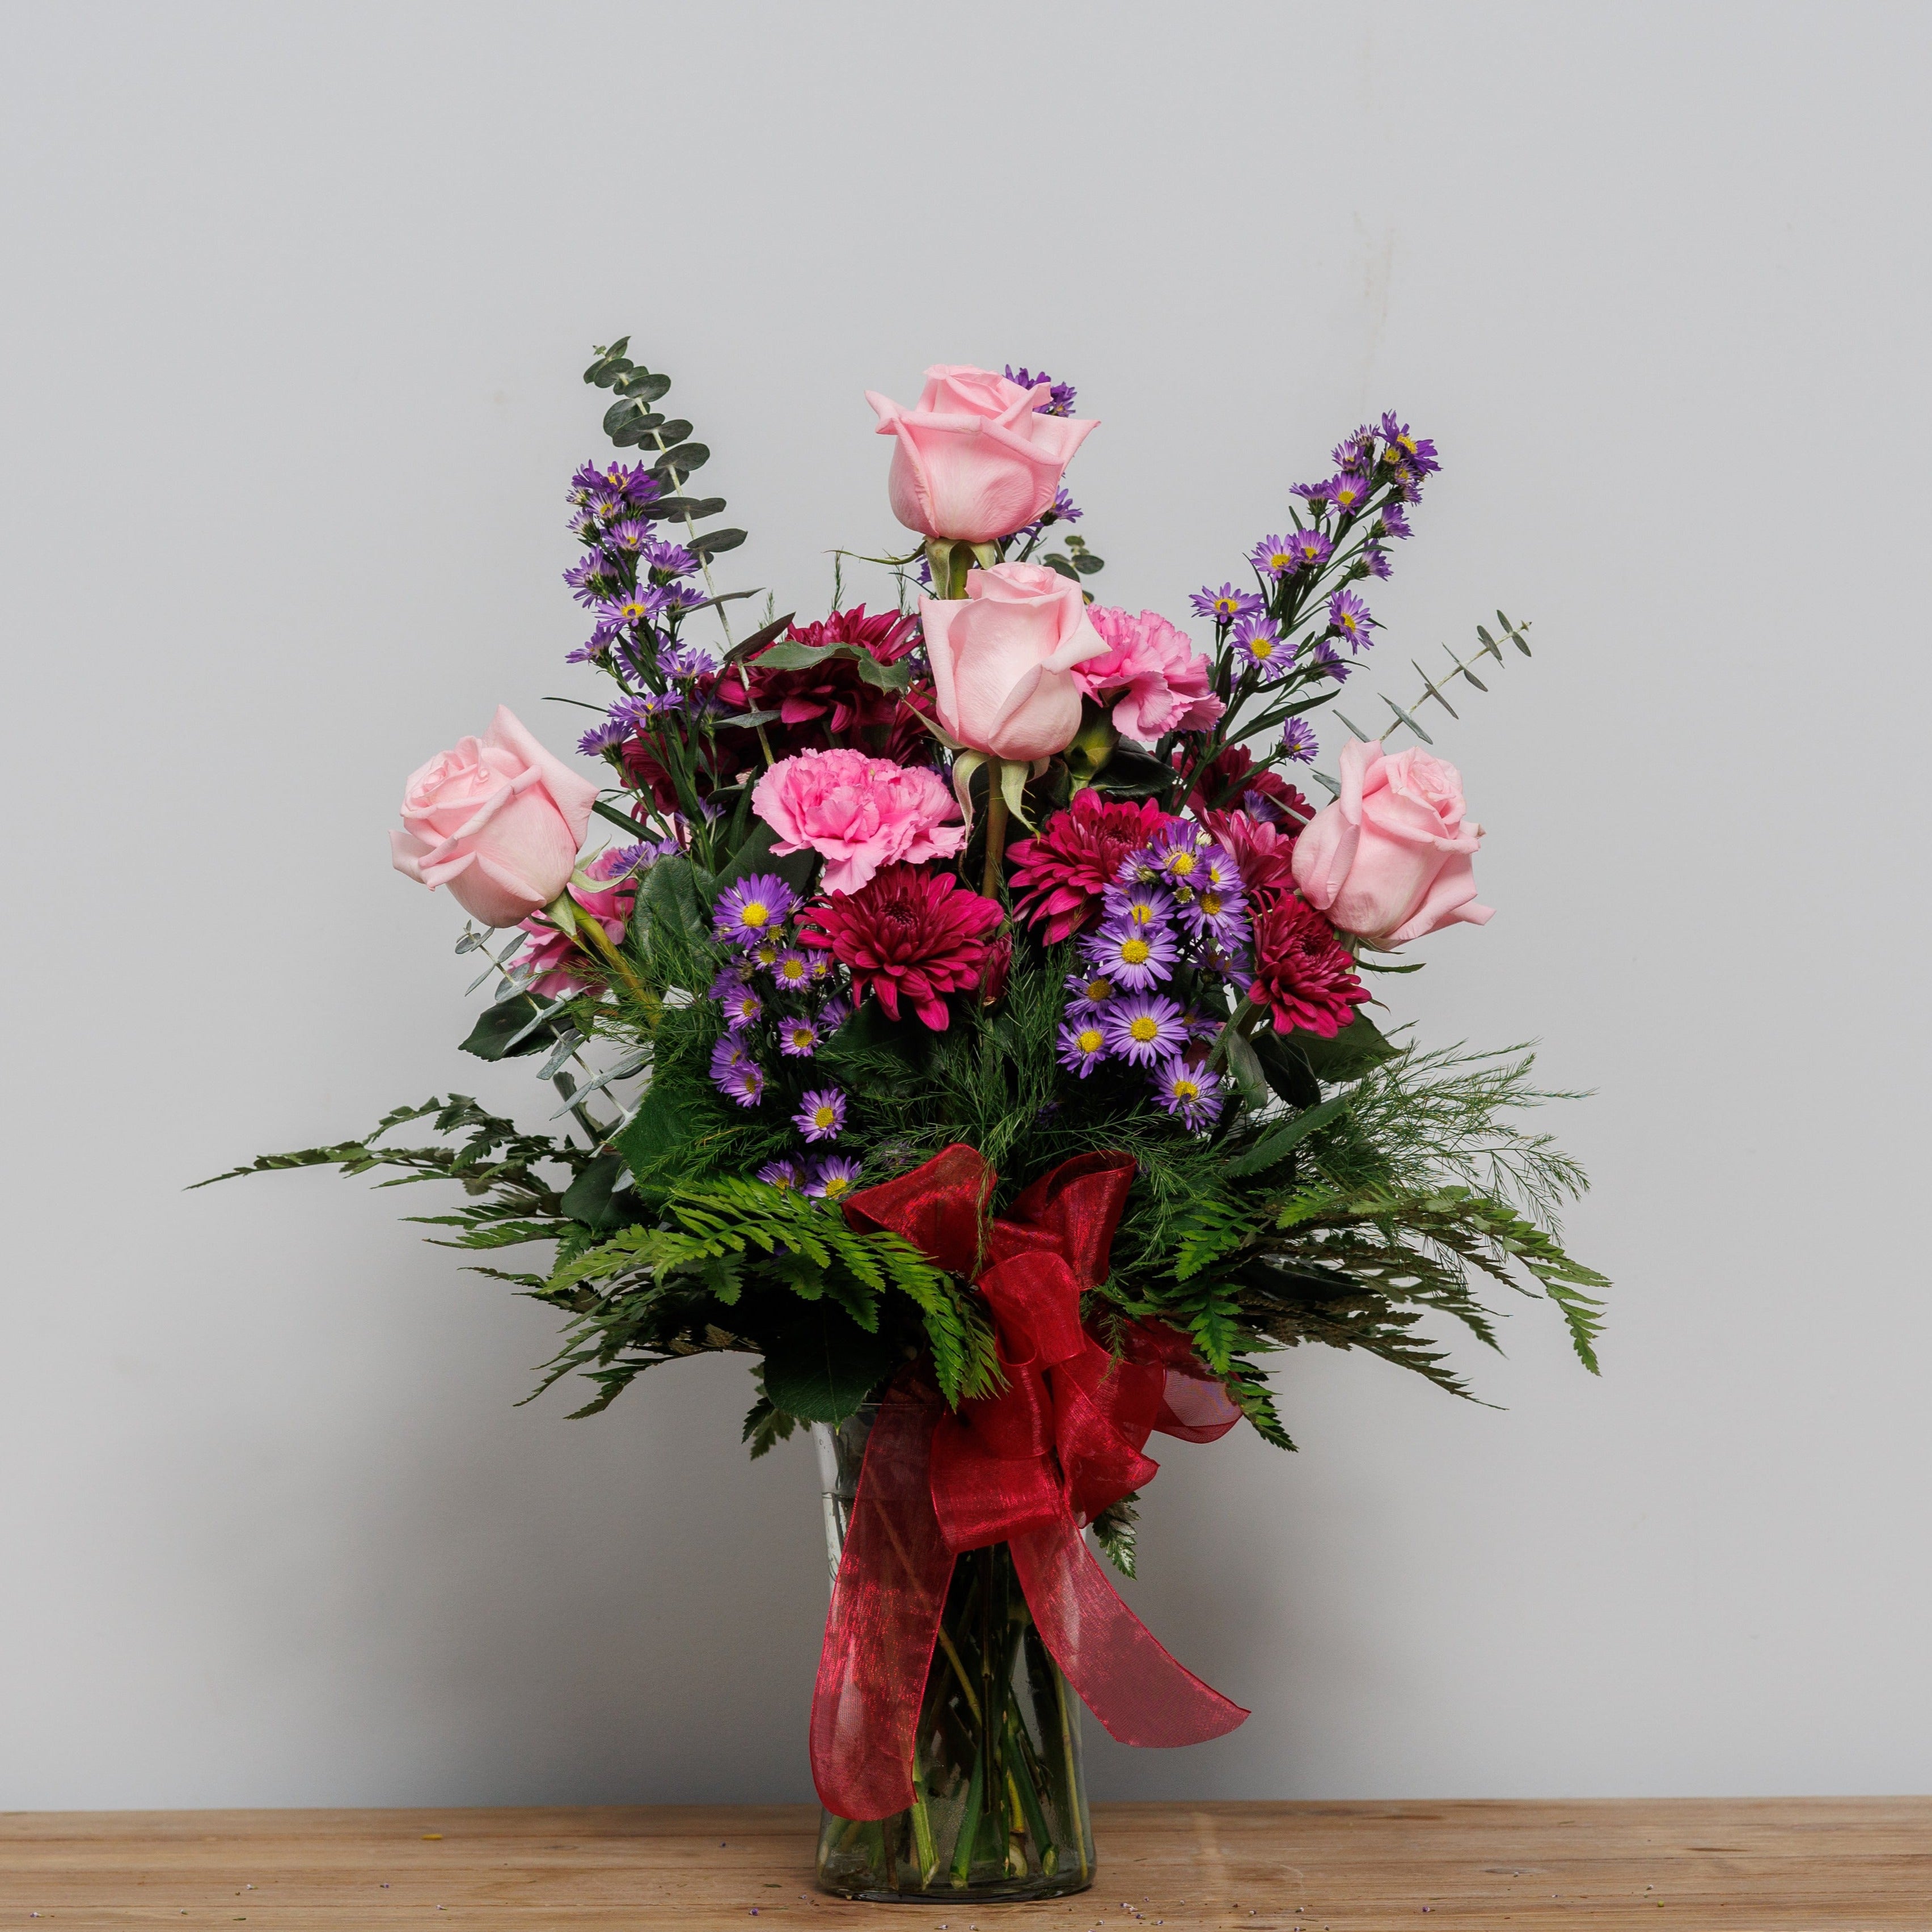 Light pink roses with magenta mums and purple asters arranged in a vase.